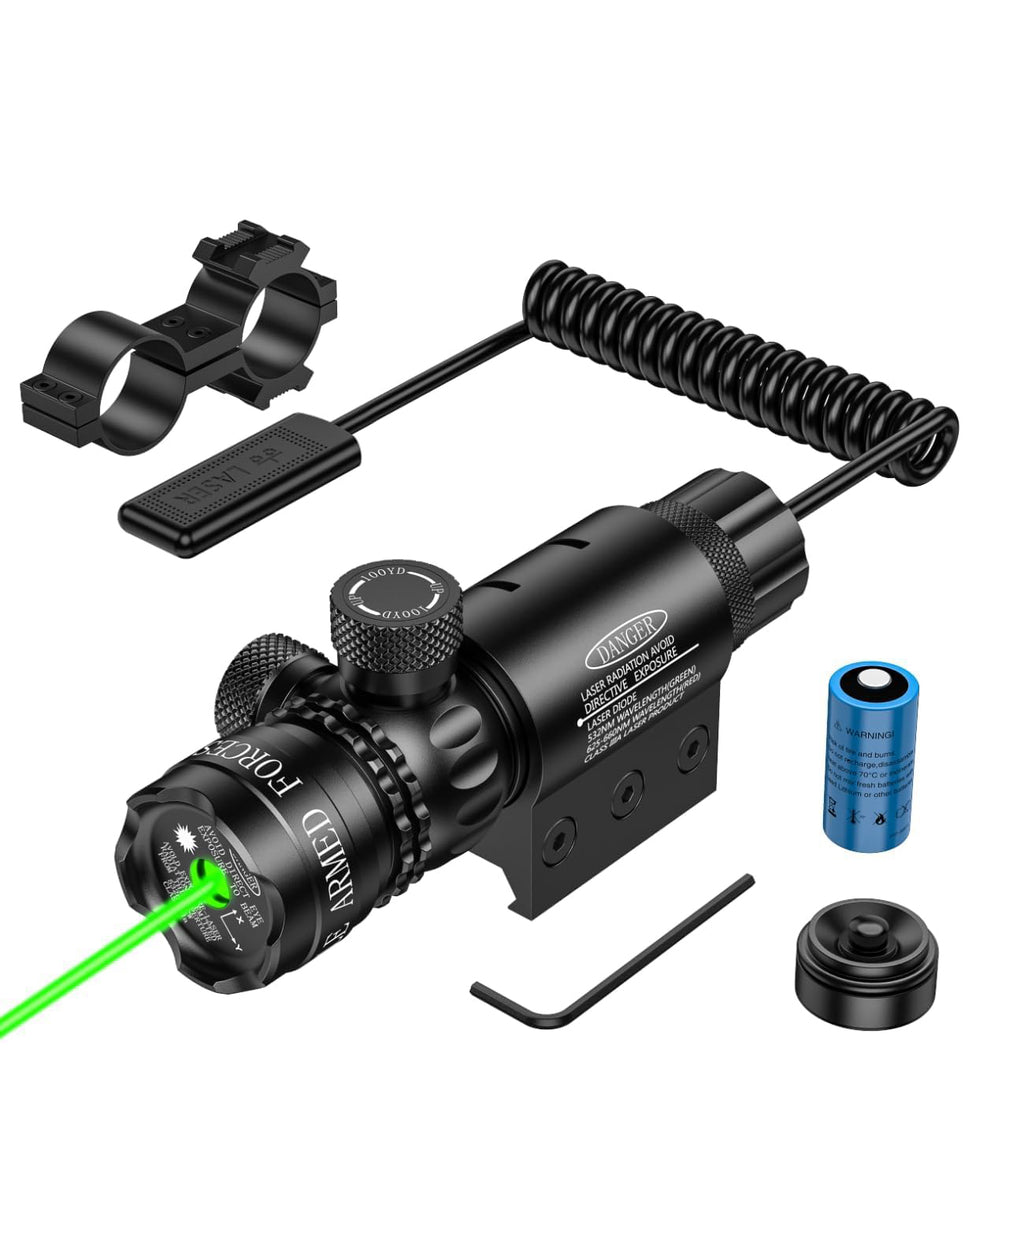 EZshoot Green Laser Sight 532nm Rifle Scope with 20mm Picatinny Mount